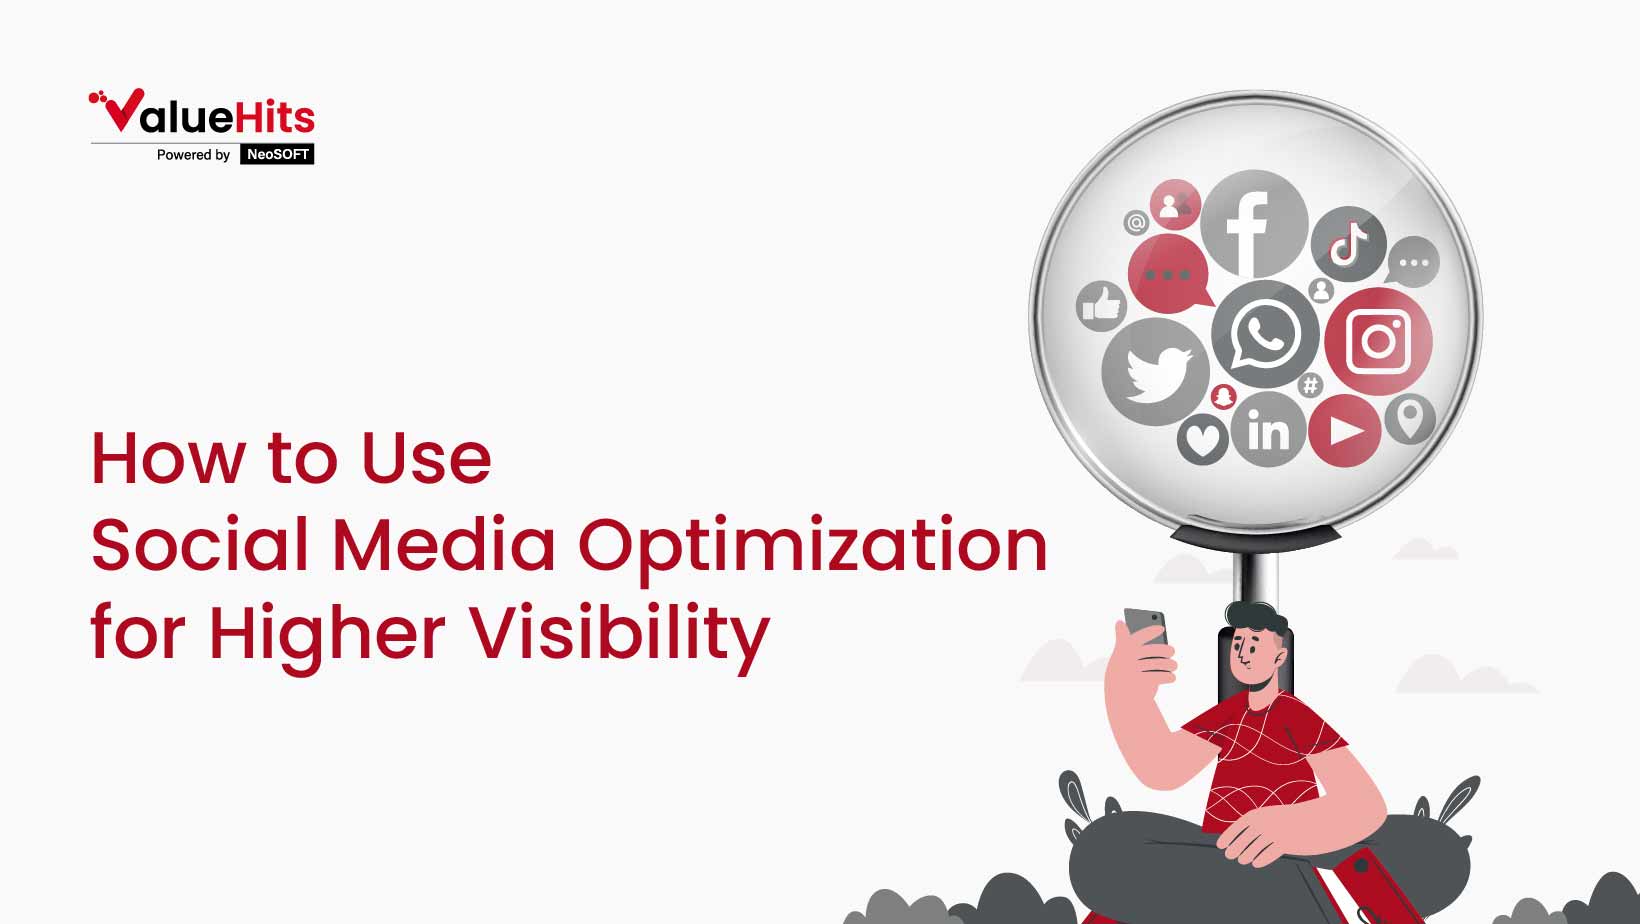 How to Use Social Media Optimization for Higher Visibility